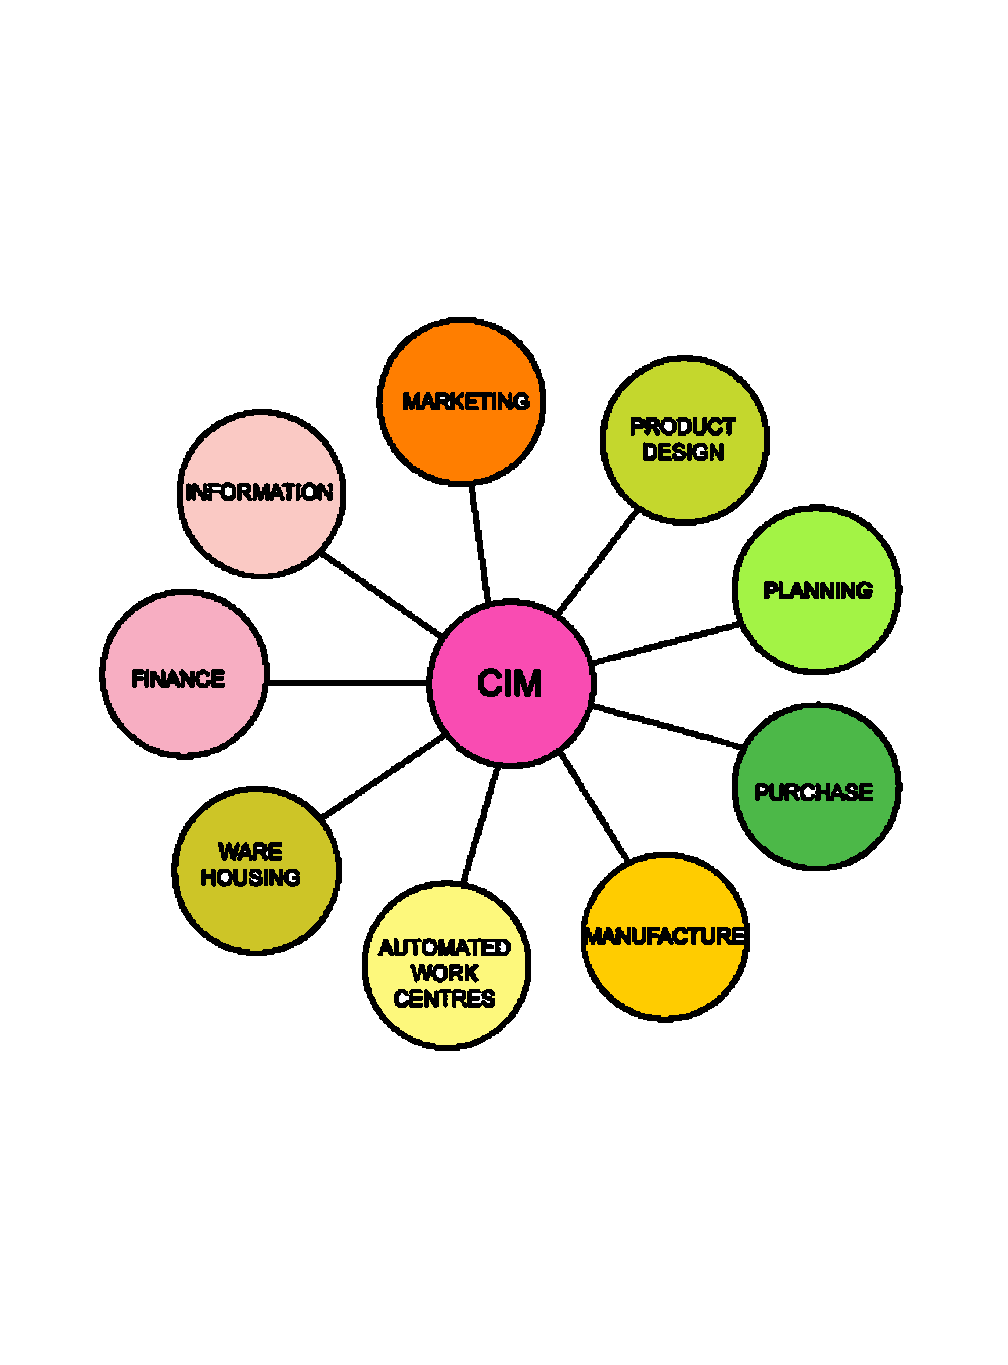 Elements of computer integrated manufacturing systems CIMS